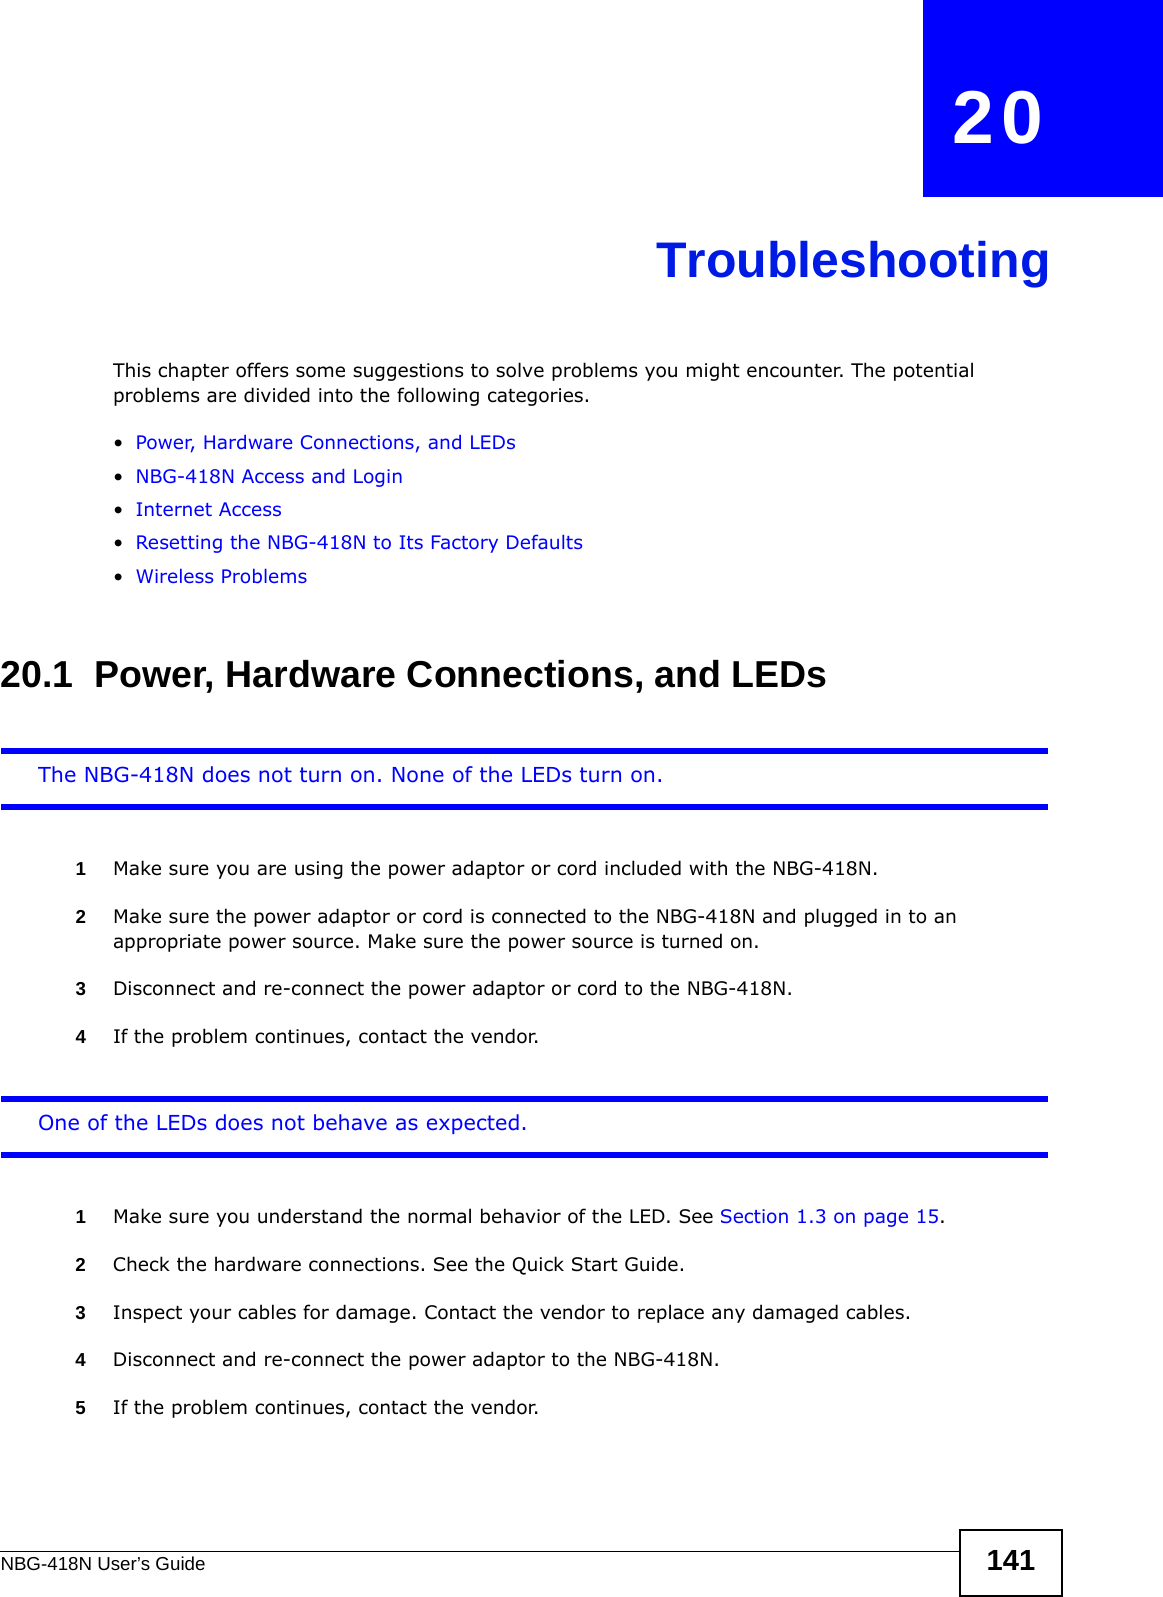 NBG-418N User’s Guide 141CHAPTER   20TroubleshootingThis chapter offers some suggestions to solve problems you might encounter. The potential problems are divided into the following categories. •Power, Hardware Connections, and LEDs•NBG-418N Access and Login•Internet Access•Resetting the NBG-418N to Its Factory Defaults•Wireless Problems20.1  Power, Hardware Connections, and LEDsThe NBG-418N does not turn on. None of the LEDs turn on.1Make sure you are using the power adaptor or cord included with the NBG-418N.2Make sure the power adaptor or cord is connected to the NBG-418N and plugged in to an appropriate power source. Make sure the power source is turned on.3Disconnect and re-connect the power adaptor or cord to the NBG-418N.4If the problem continues, contact the vendor.One of the LEDs does not behave as expected.1Make sure you understand the normal behavior of the LED. See Section 1.3 on page 15.2Check the hardware connections. See the Quick Start Guide. 3Inspect your cables for damage. Contact the vendor to replace any damaged cables.4Disconnect and re-connect the power adaptor to the NBG-418N. 5If the problem continues, contact the vendor.